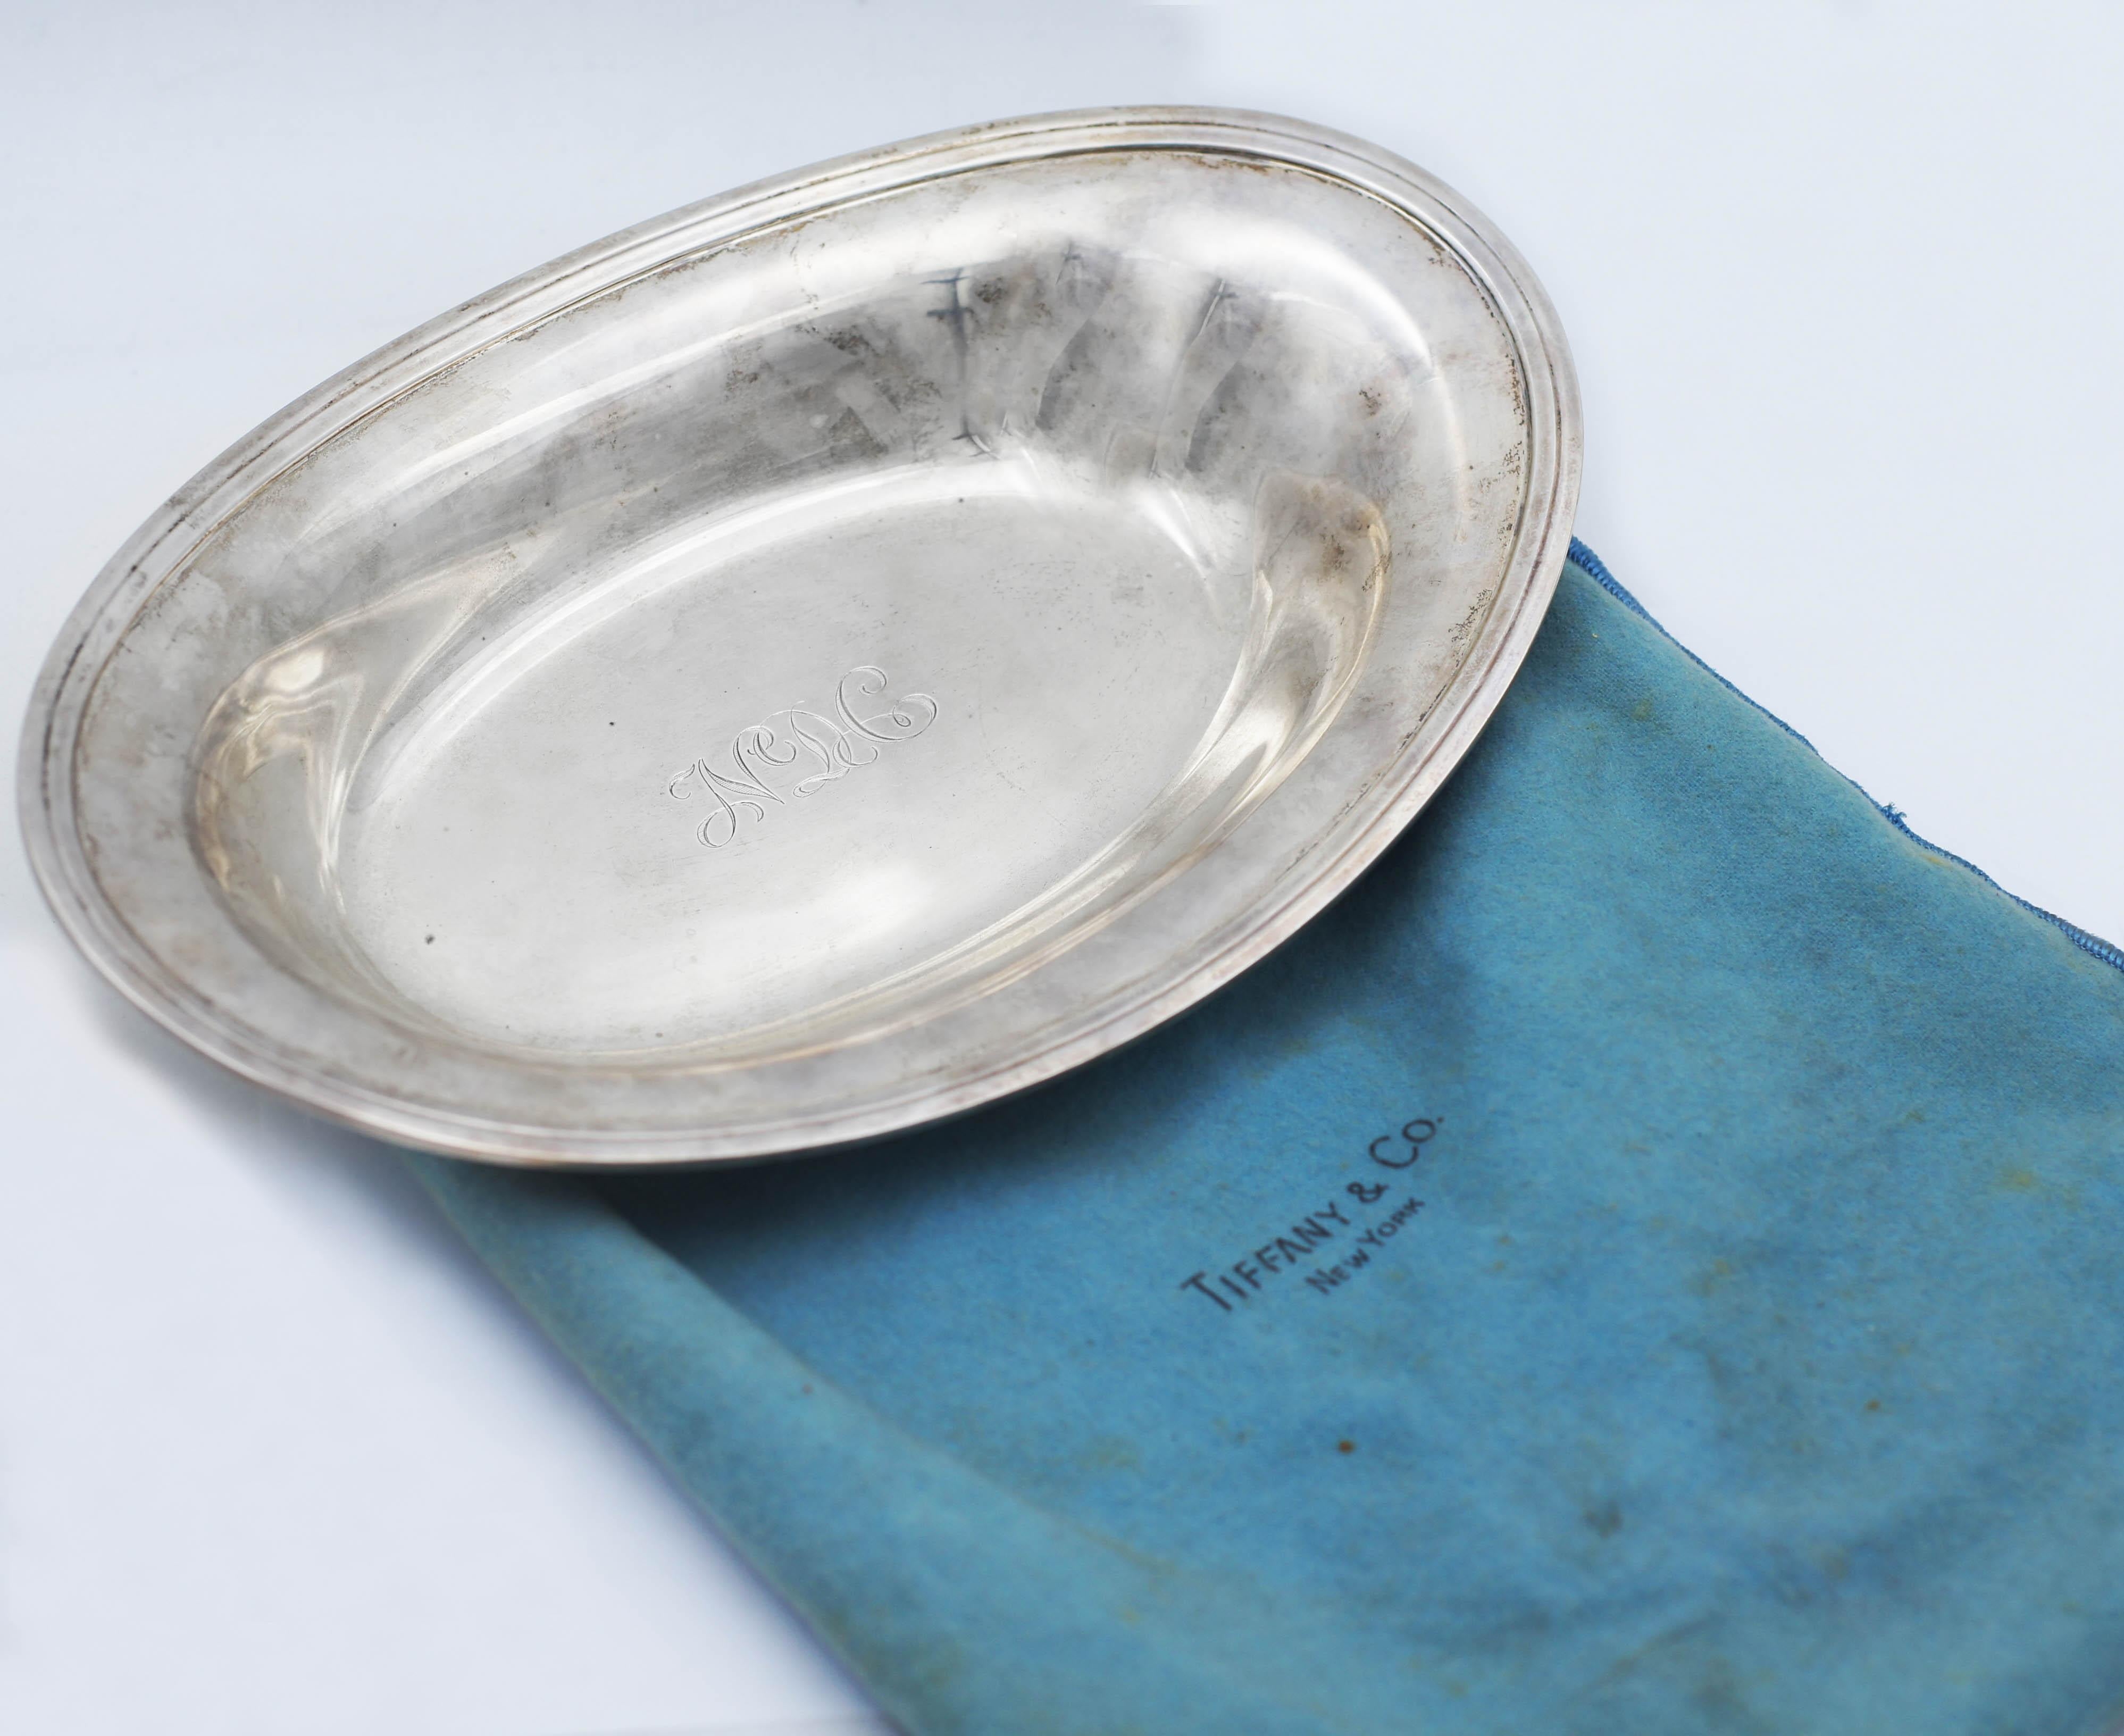 TIFFANY & Co.
Sterling Silver 925
Platter Bowl Tray
Serving or Decorative piece
Approx. : 6 5/8